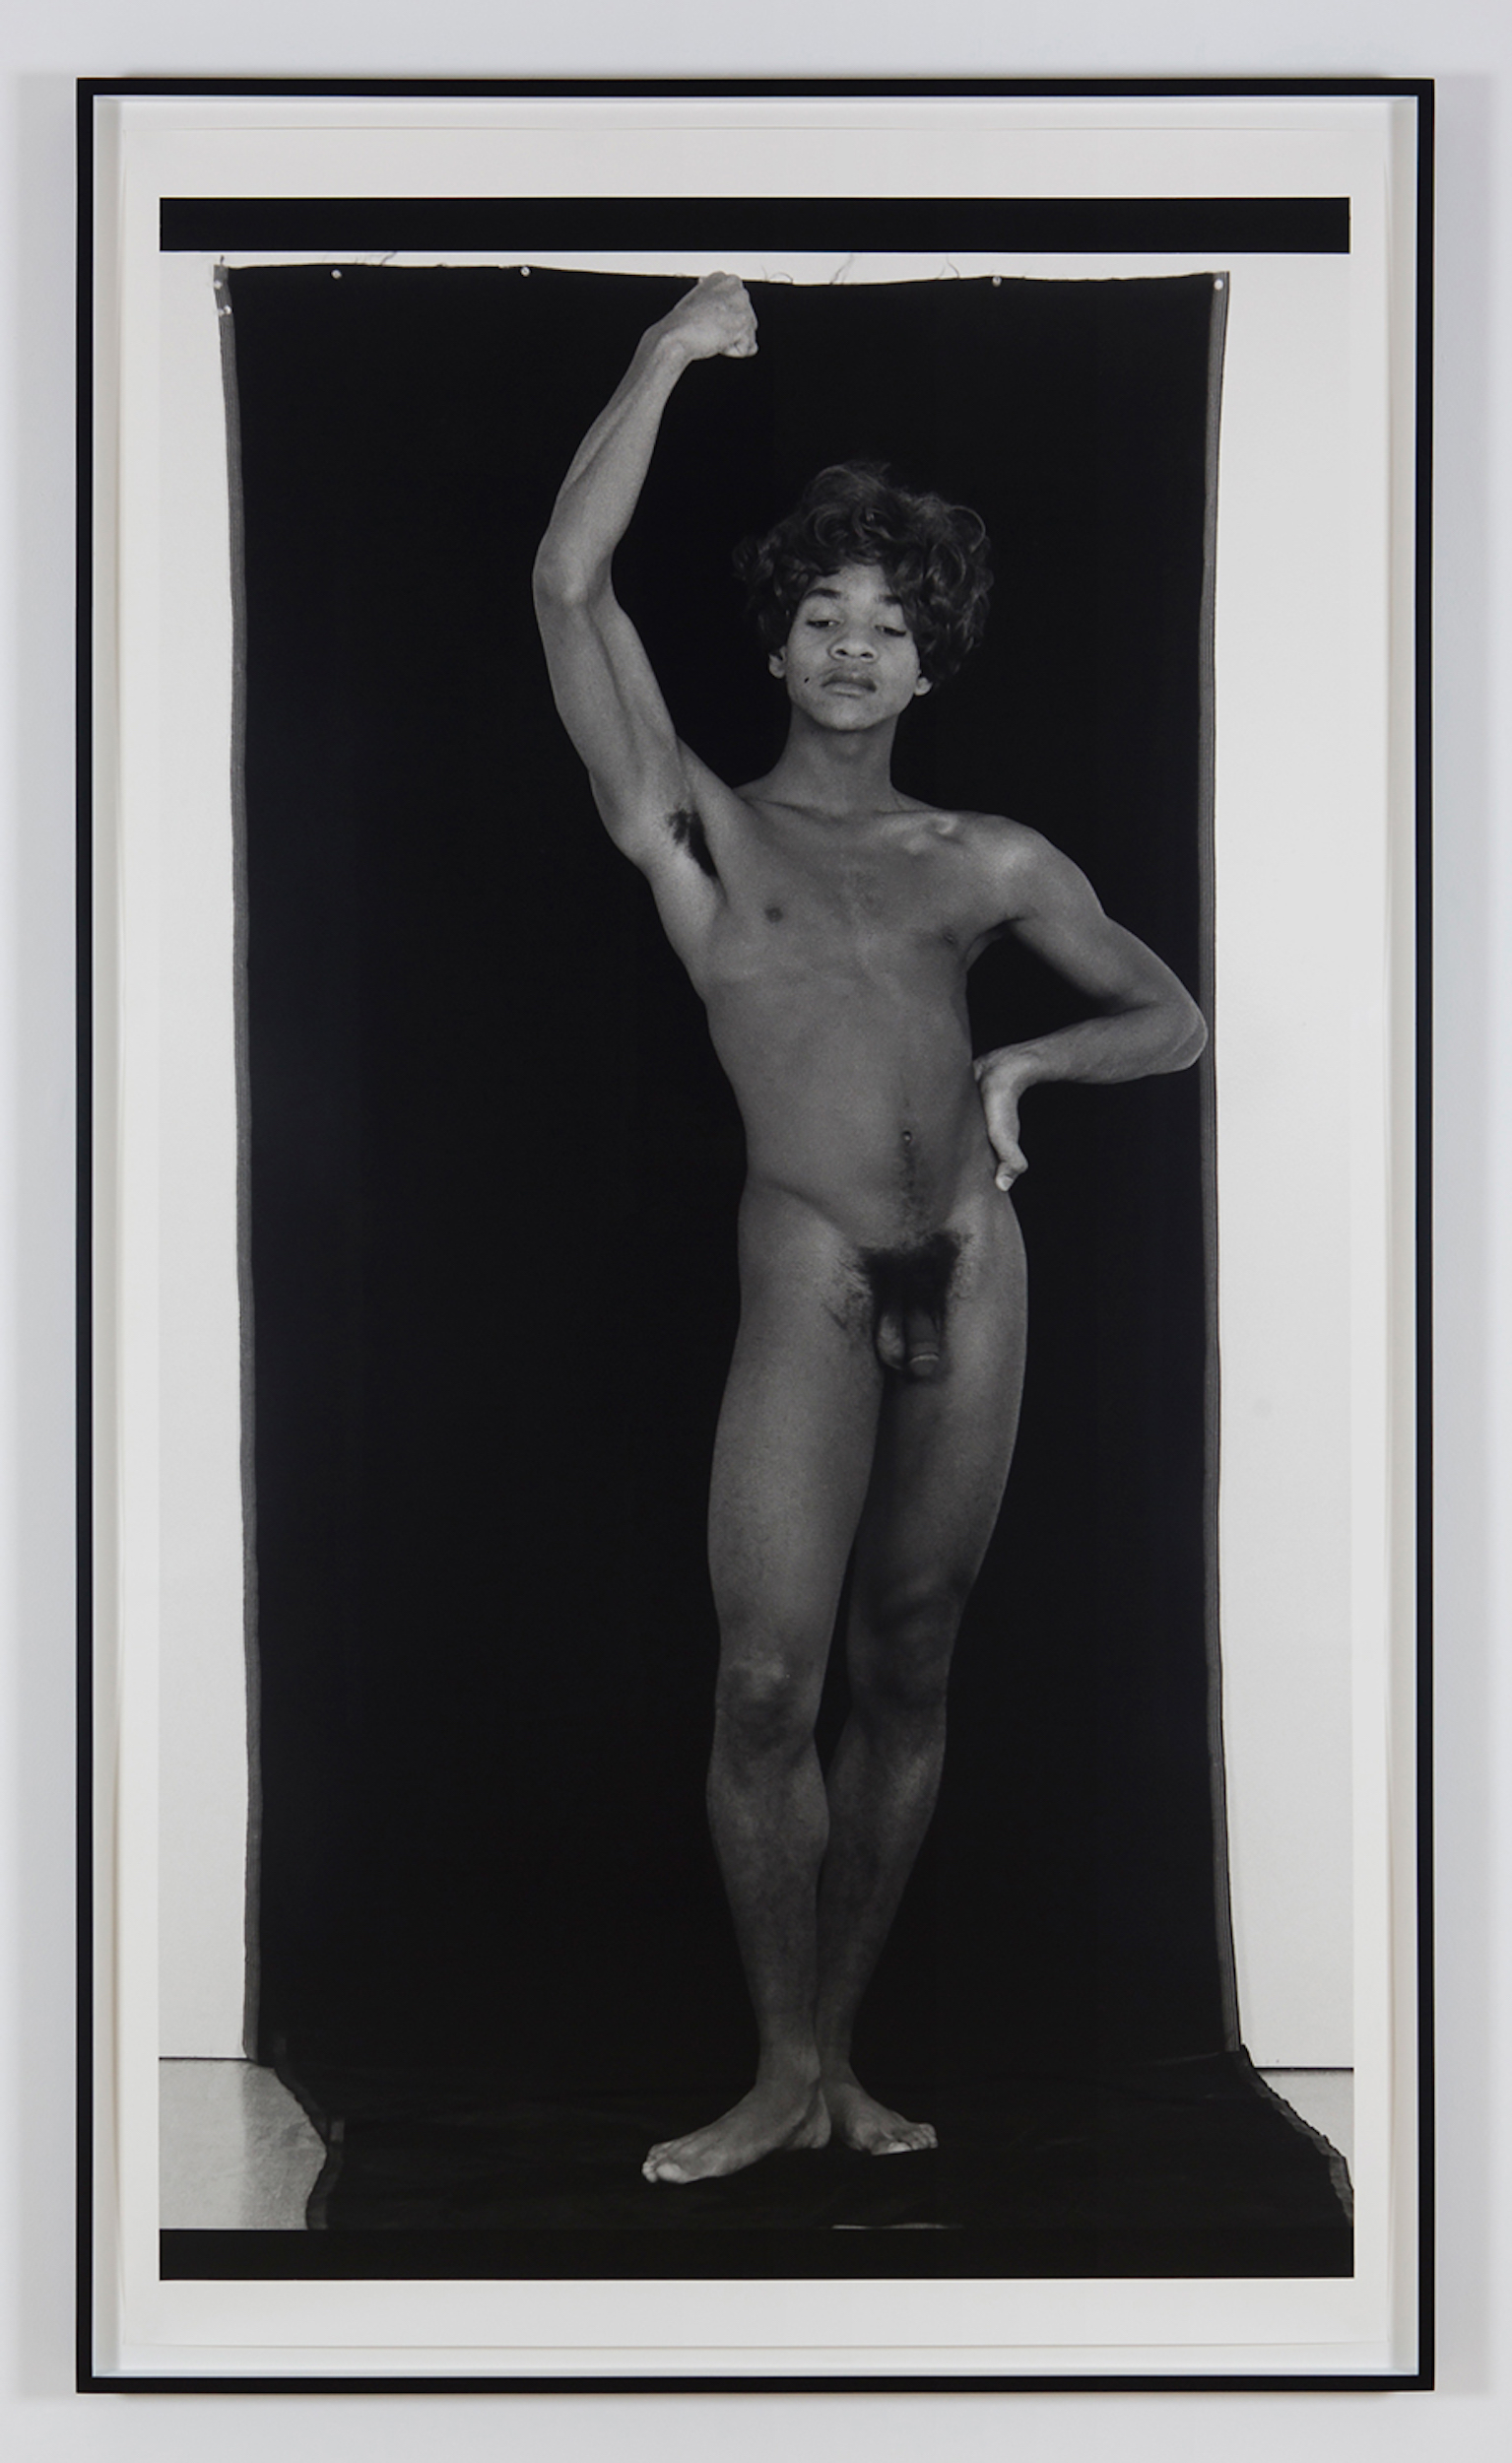 Thomas Erben Gallery – 25 years - Lyle Ashton Harris, <i>Constructs #12</i>, 1989. B/W silver gelatin print, edition of 3, 72 x 48 in.
<br></<br><br></<br>
Lyle Ashton Harris’s <i>Construct #12</i> from 1987-88 is one of a four-part series that was included in the groundbreaking exhibition “Black Male: Representations of Masculinity in Contemporary American Art,” curated by Thelma Golden at the Whitney Museum of American Art in 1994 and which then traveled to the Hammer Museum, Los Angeles, in 1995. This photograph was not part of our 1997 exhibition <i>Lyle Ashton Harris – Early Works 1987-88 (The White Face Series)</i>, but since it reverberates with the representation of “the self” in Adrian Piper’s piece and links to the discussion of queerness in Chitra Ganesh’s <i>Tales of Amnesia</i> (2002/07) as well as Tejal Shah’s video <i>Chingari Chumma (Stinging Kiss)</i> (2000), we decided to include it nonetheless.